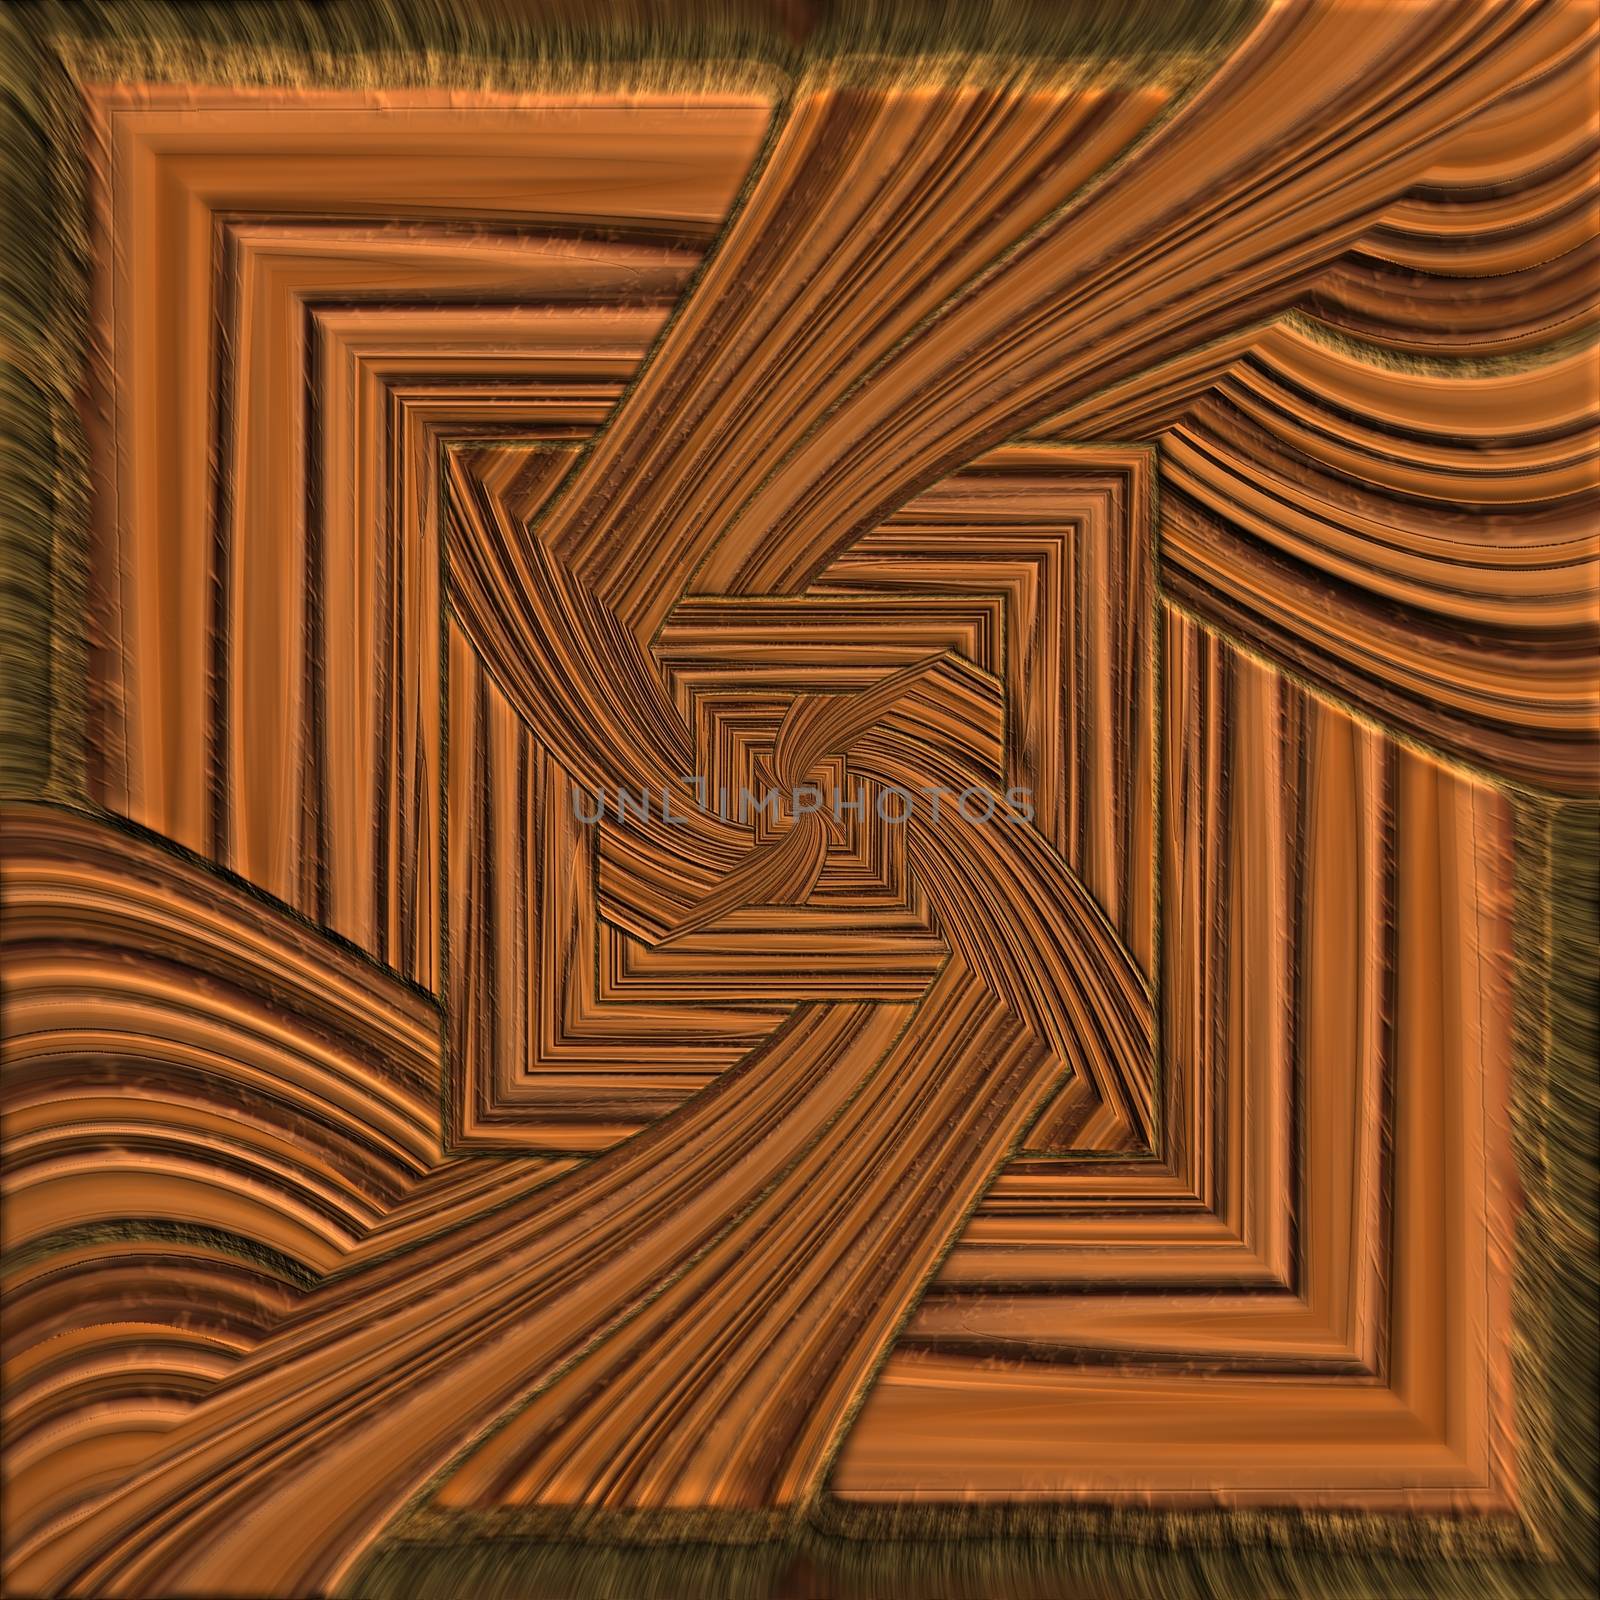 Luxury background with embossed pattern on wood by stocklady